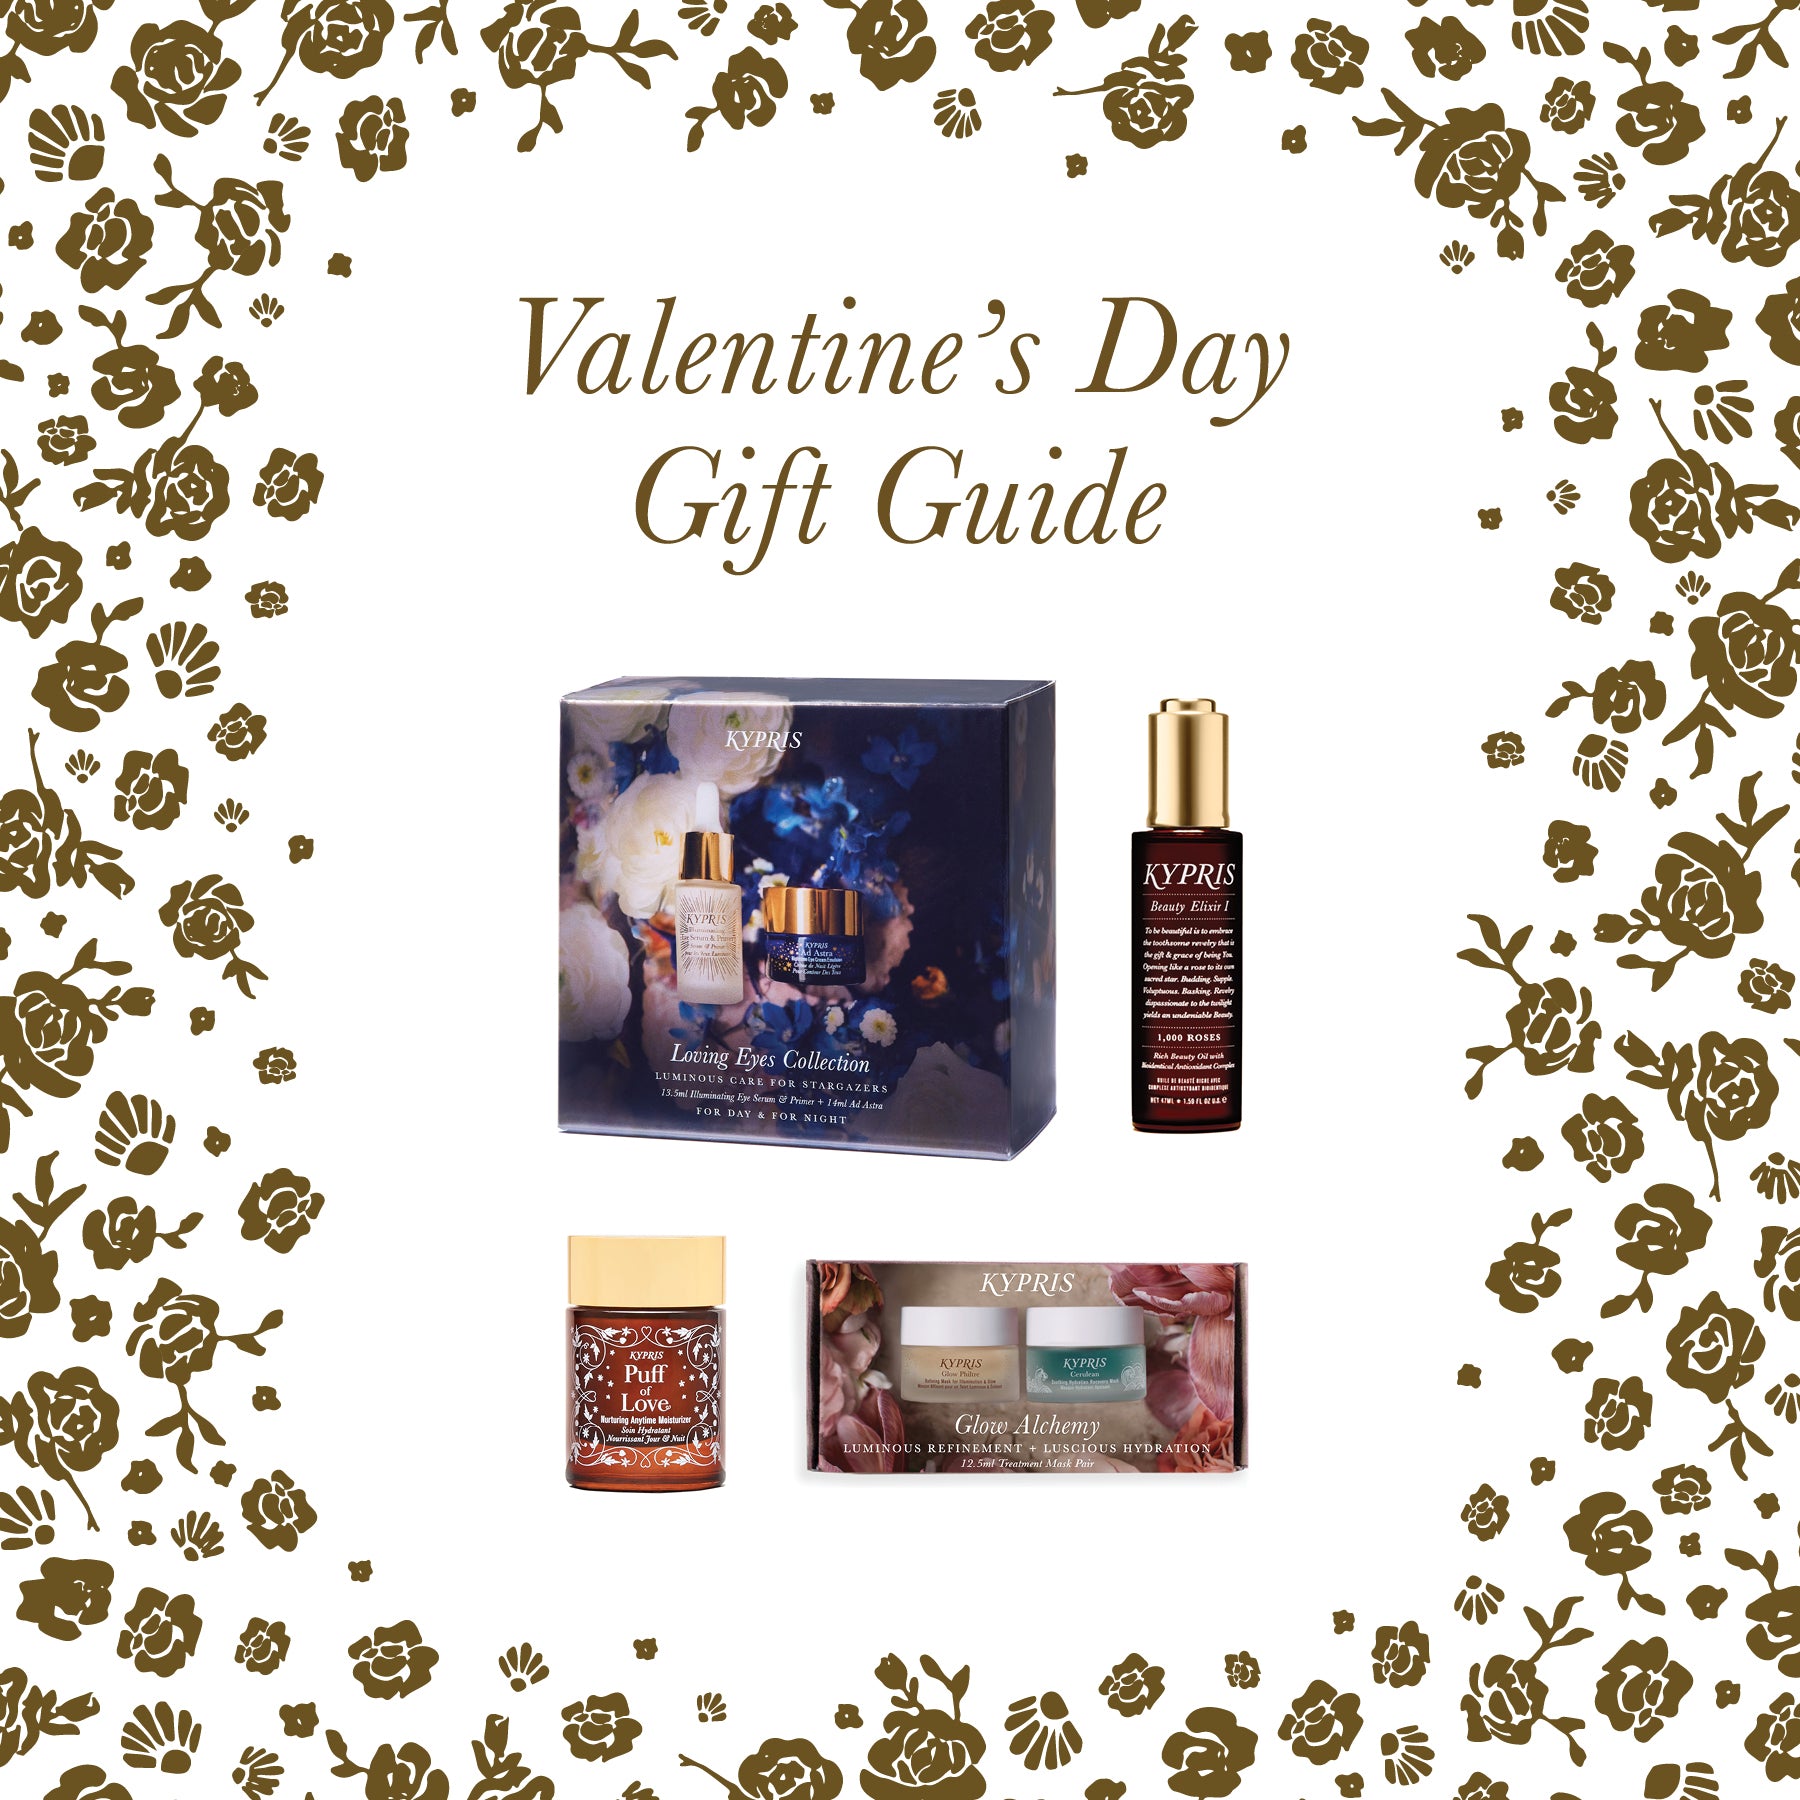 Give The Gift of Beauty